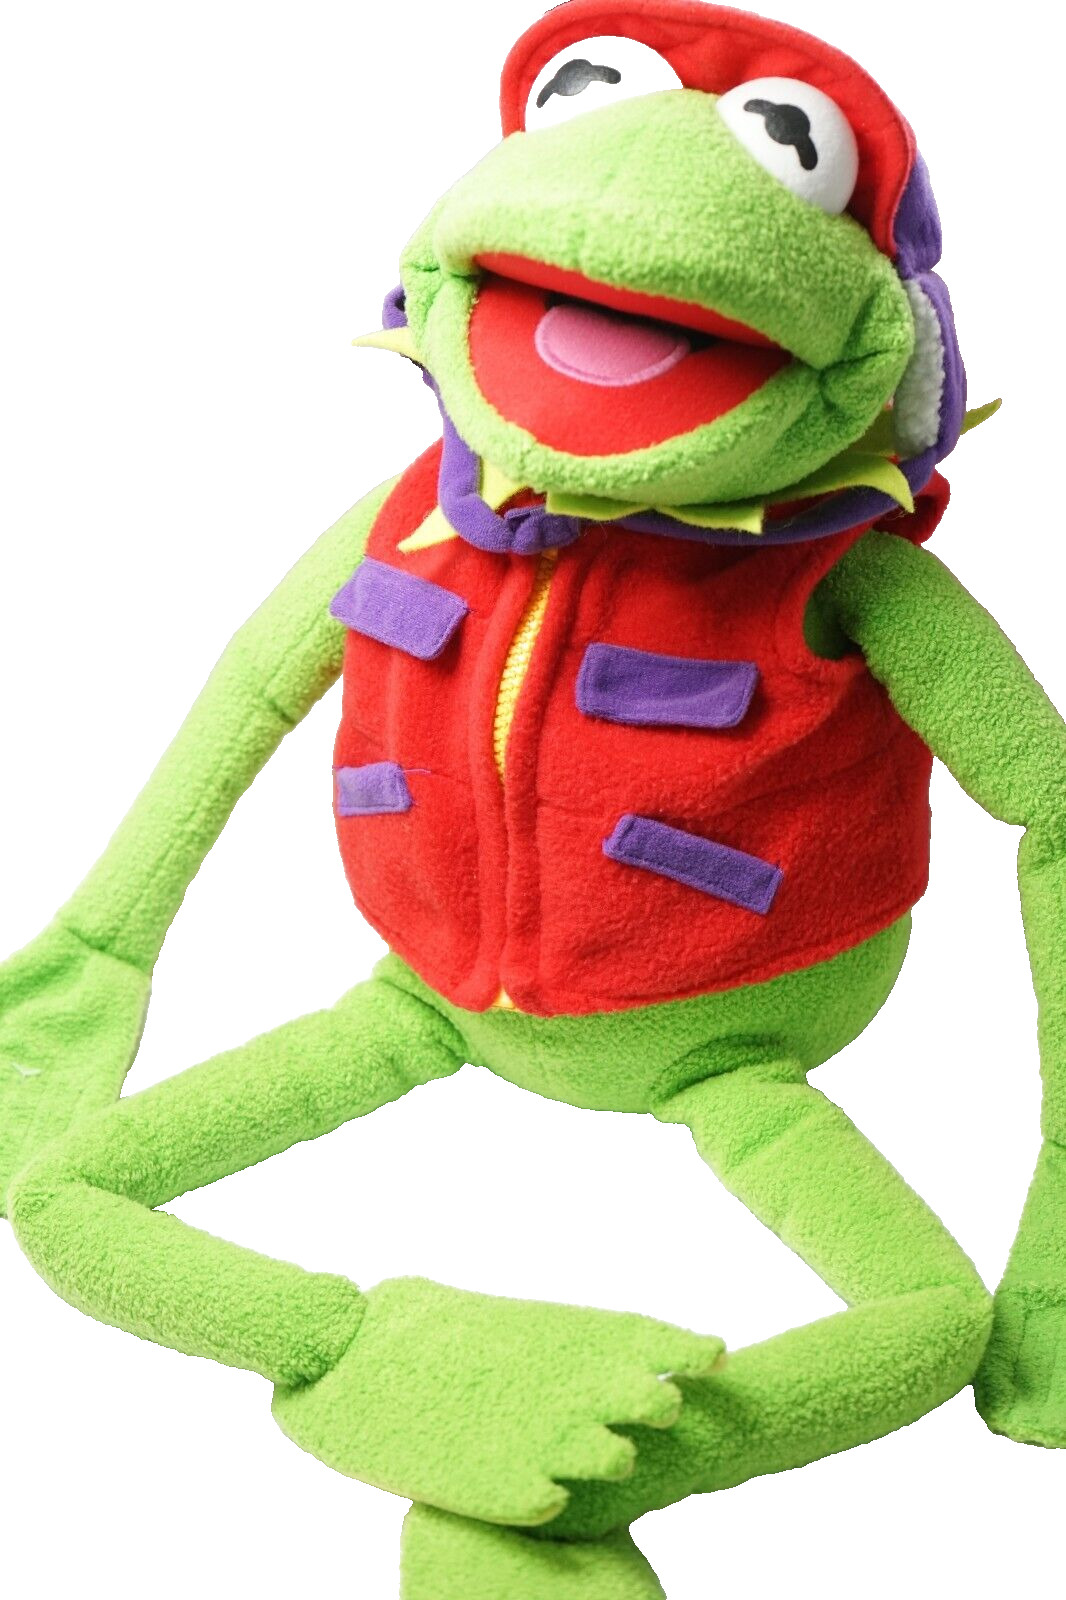 2002 Macy's Kermit the Frog-tographer Plush Exclusive 26